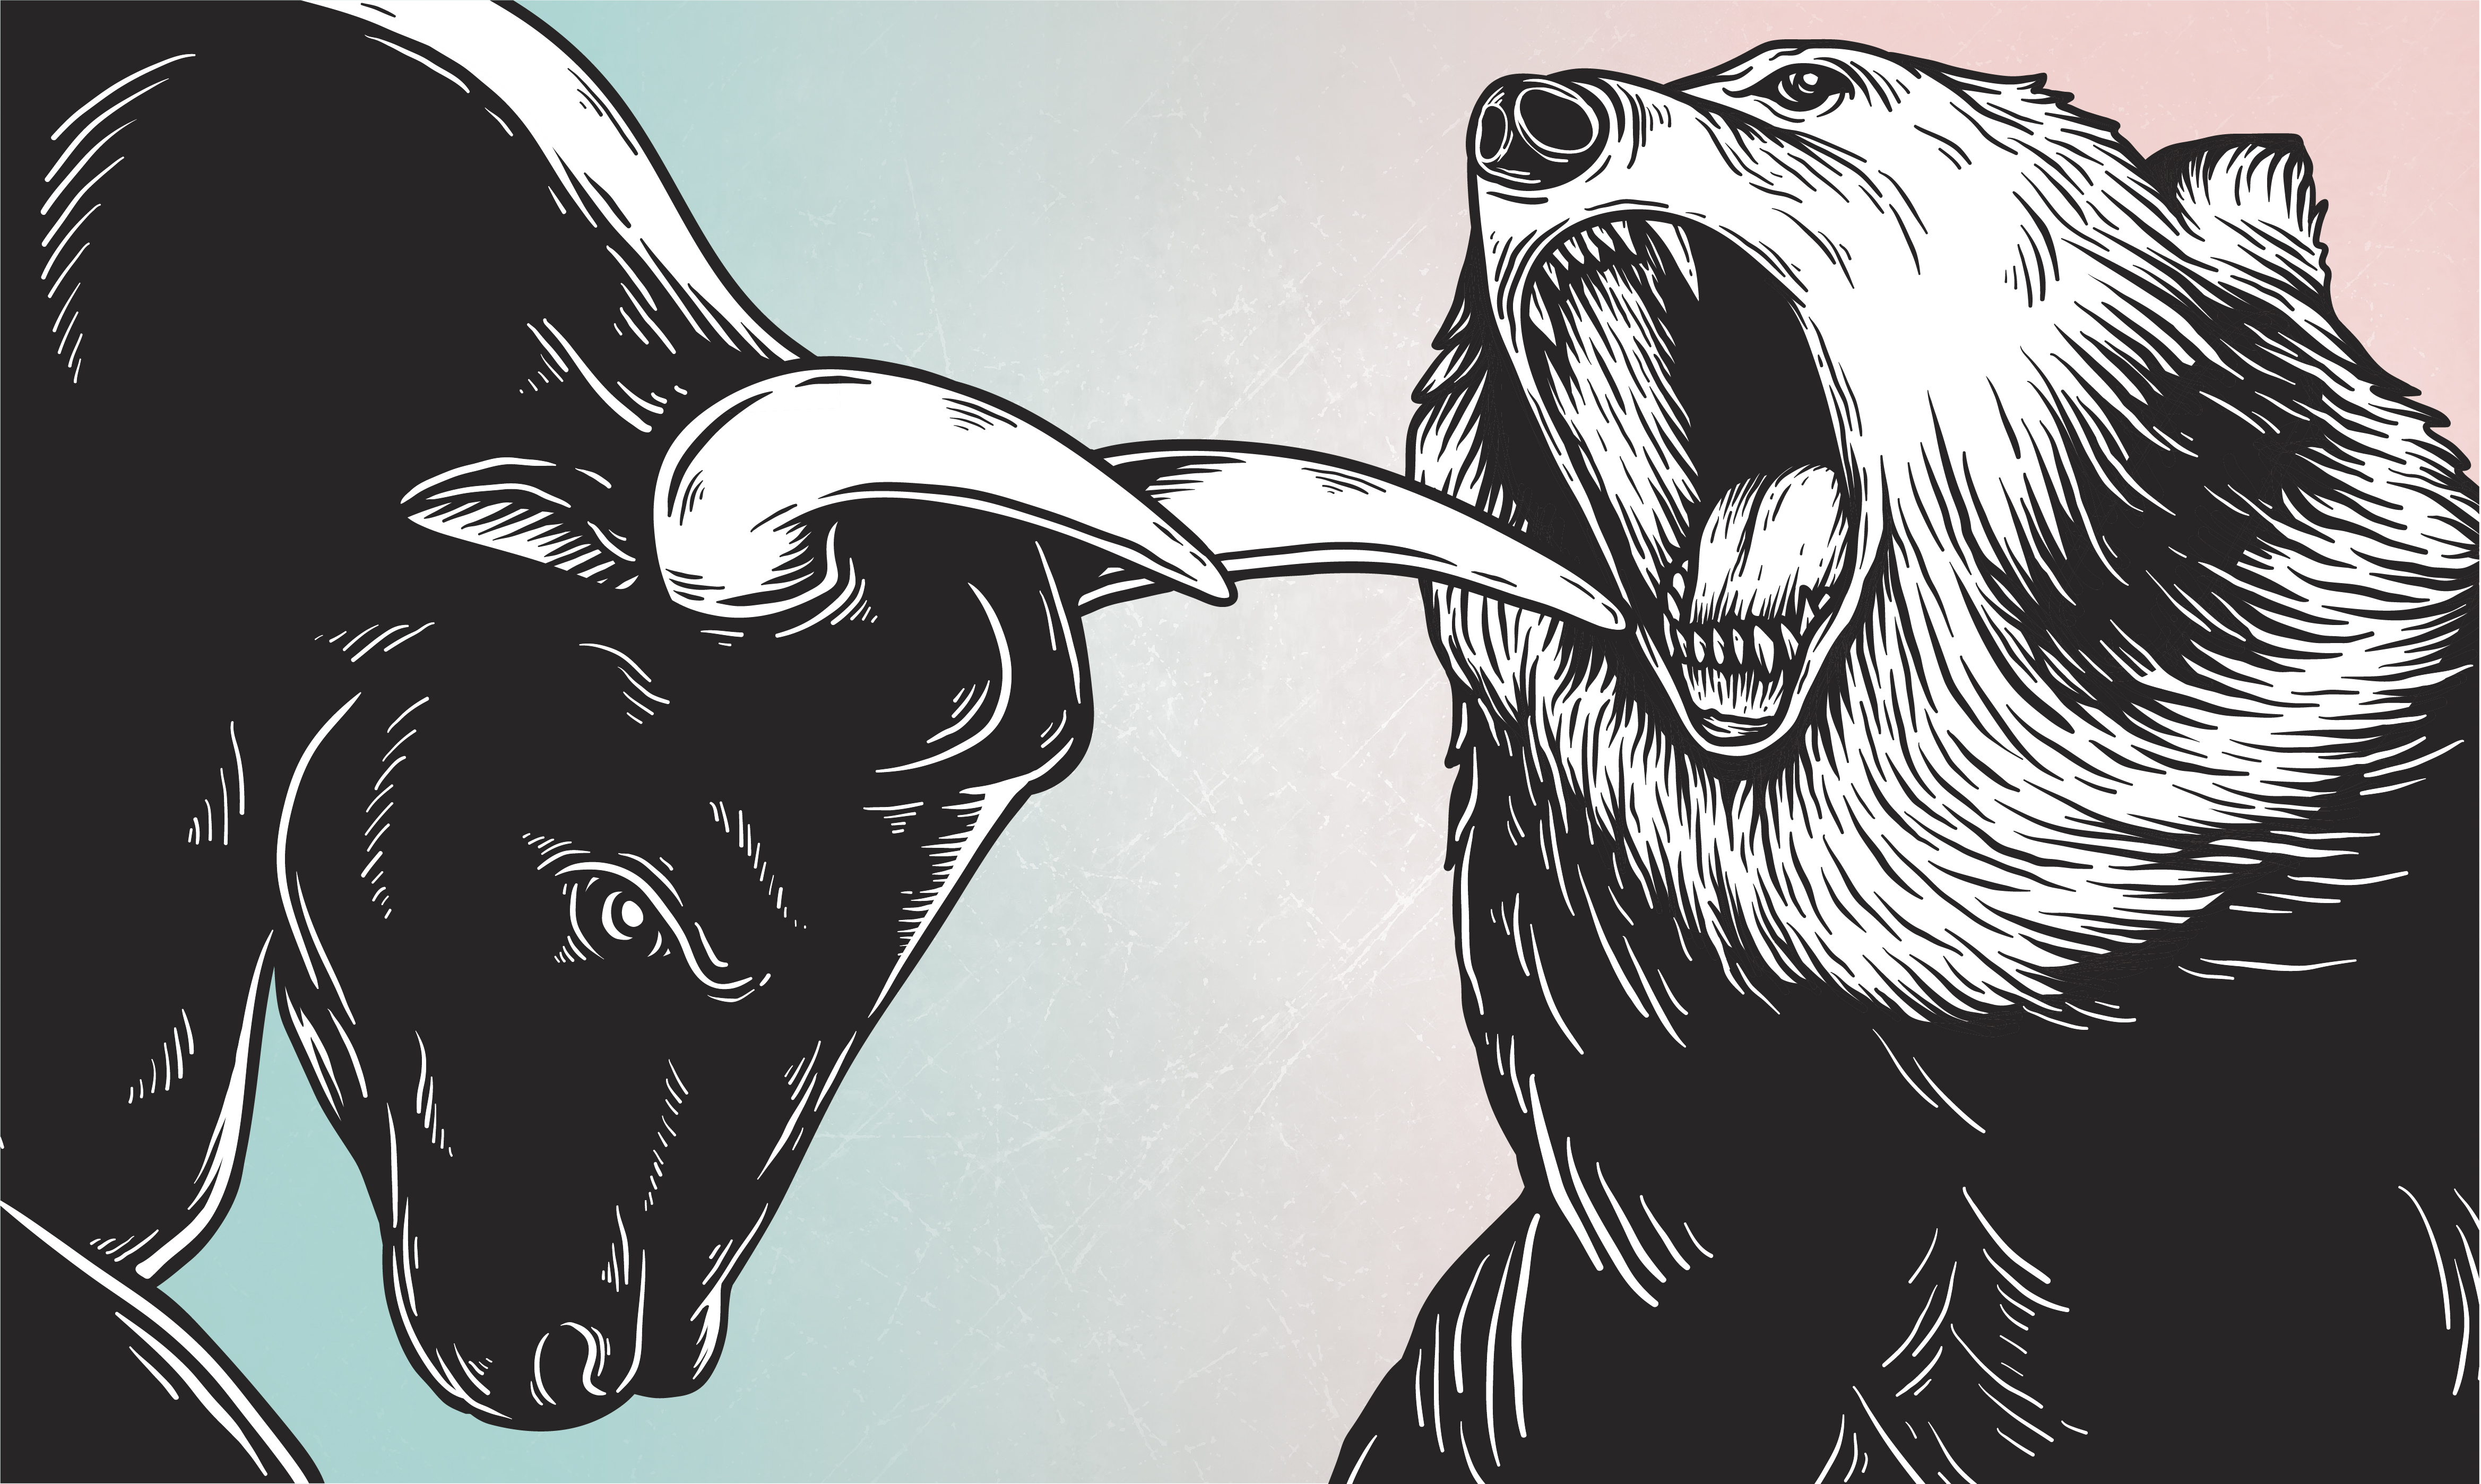 A bull and a bear fighting comic style vector - Download Free Vectors